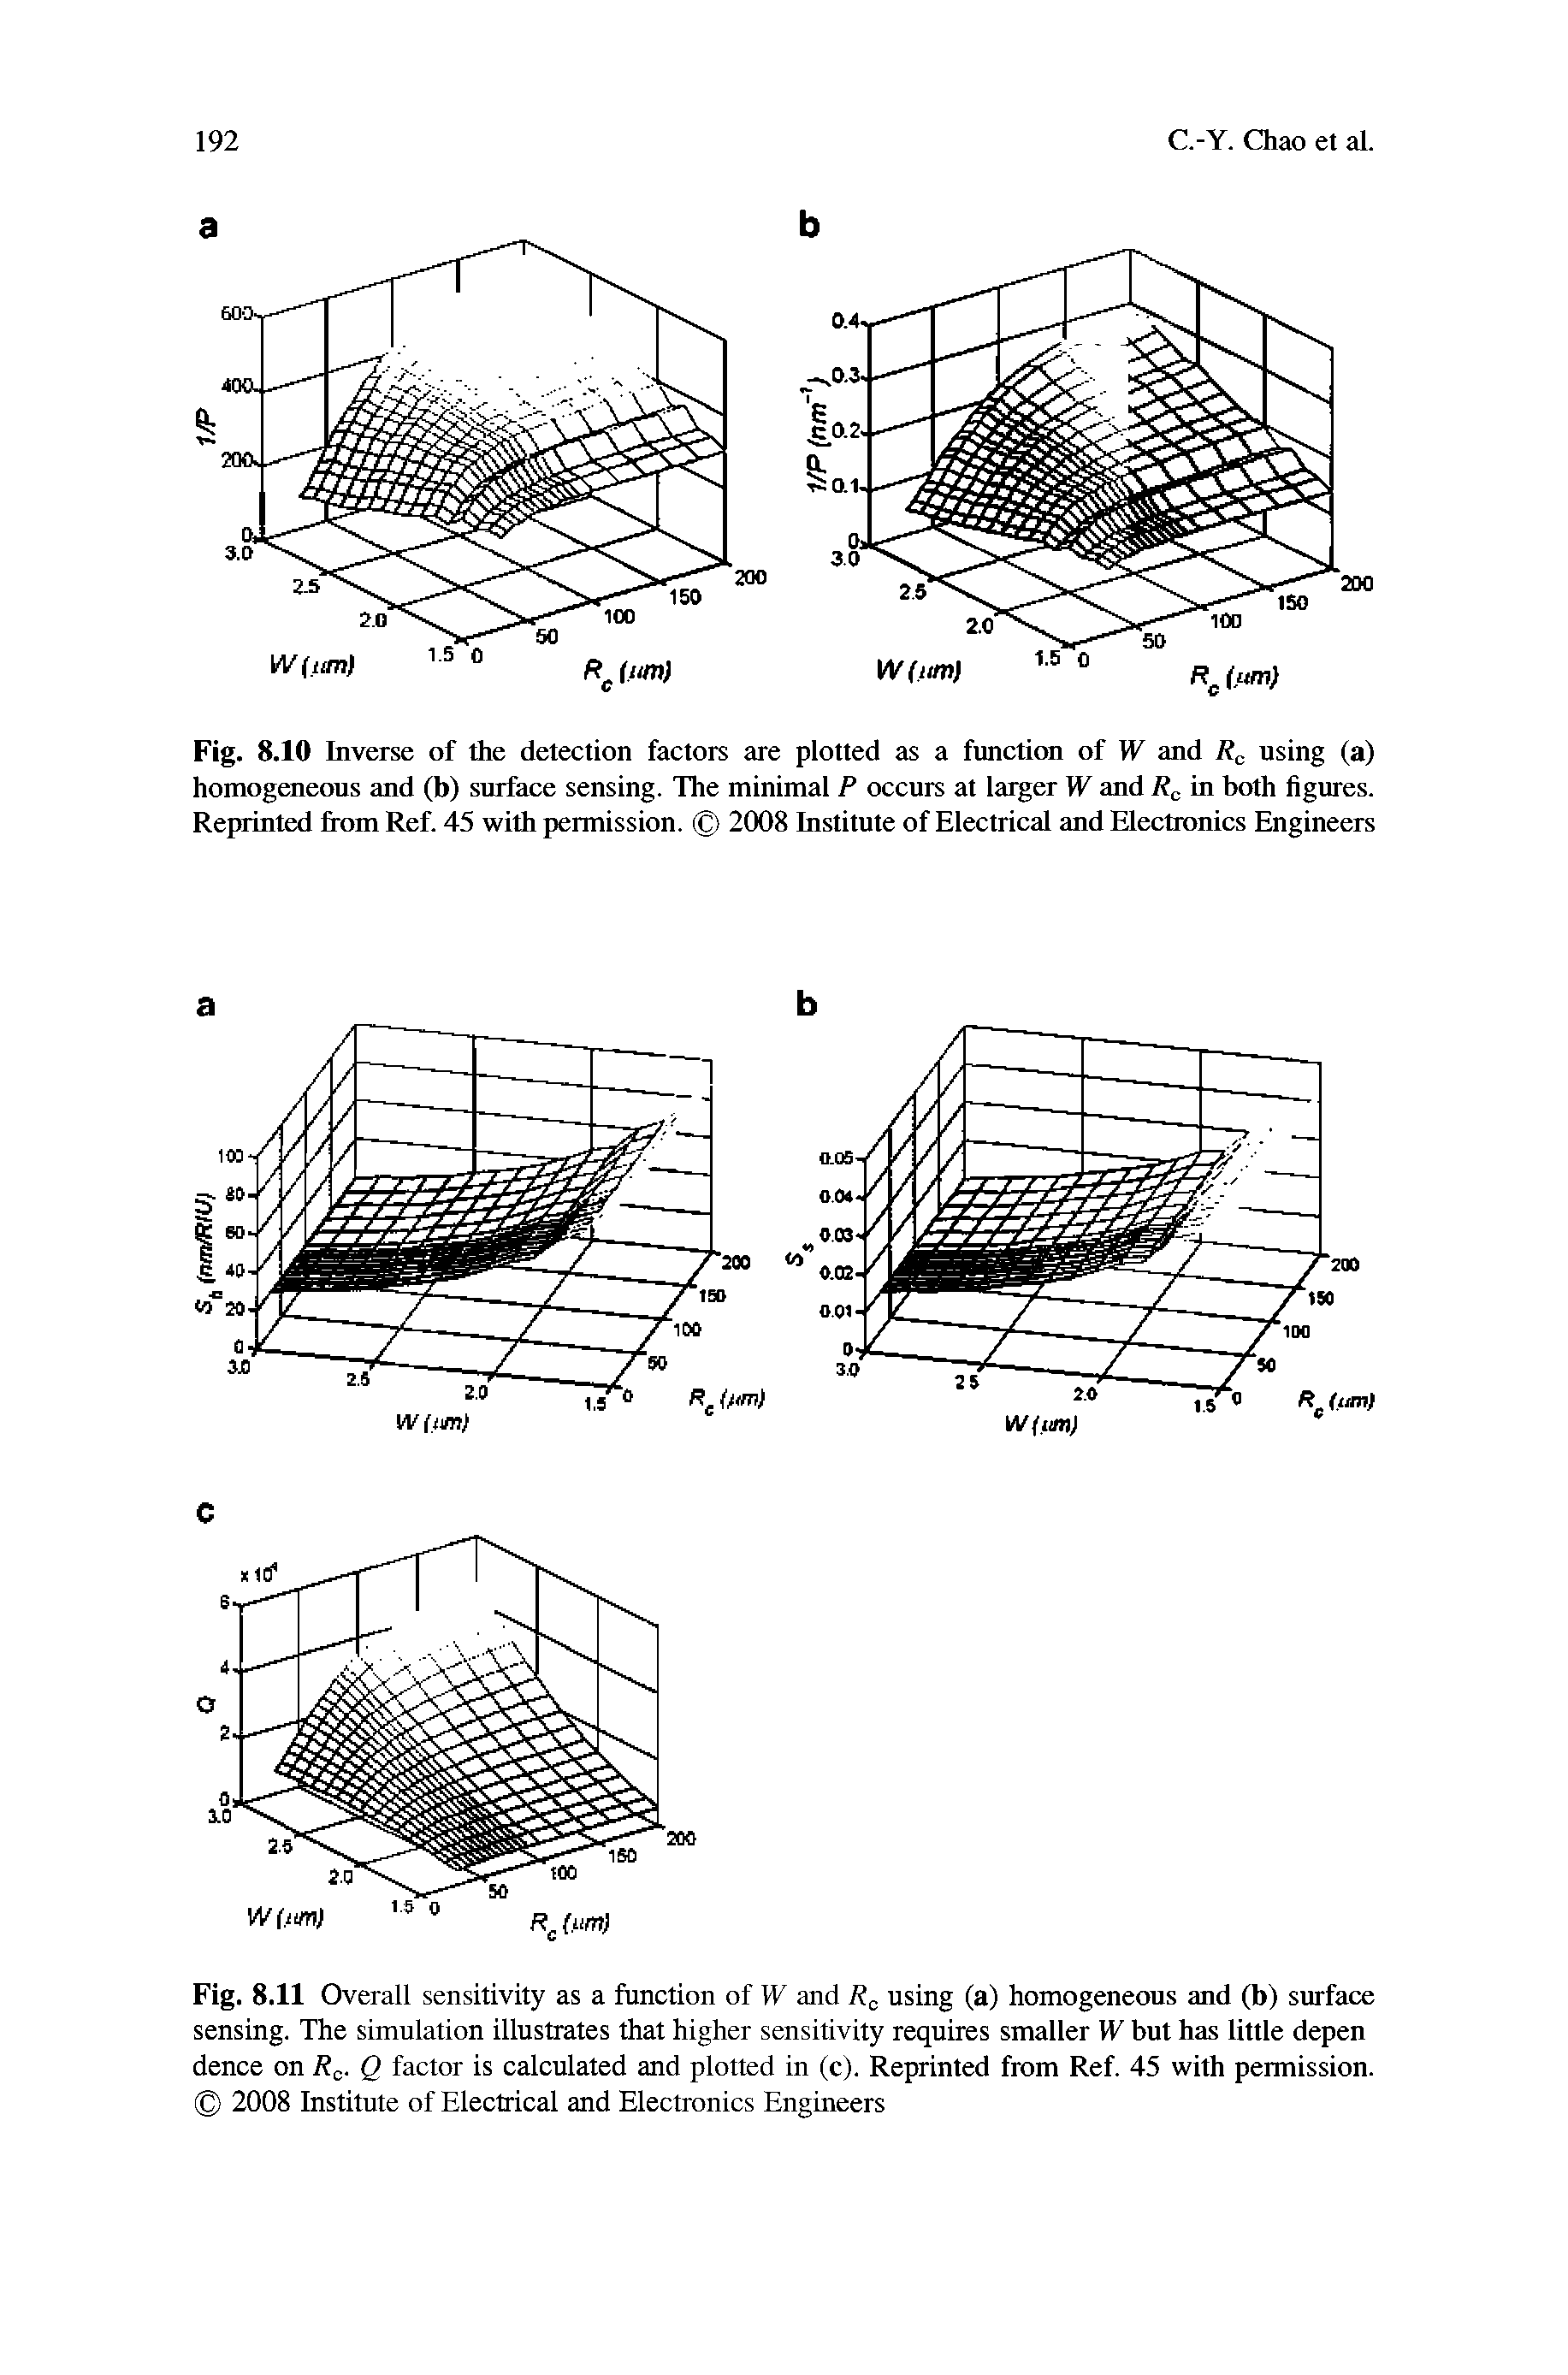 Fig. 8.10 Inverse of the detection factors are plotted as a function of W and Rc using (a) homogeneous and (b) surface sensing. The minimal P occurs at larger W and Rc in both figures. Reprinted from Ref. 45 with permission. 2008 Institute of Electrical and Electronics Engineers...